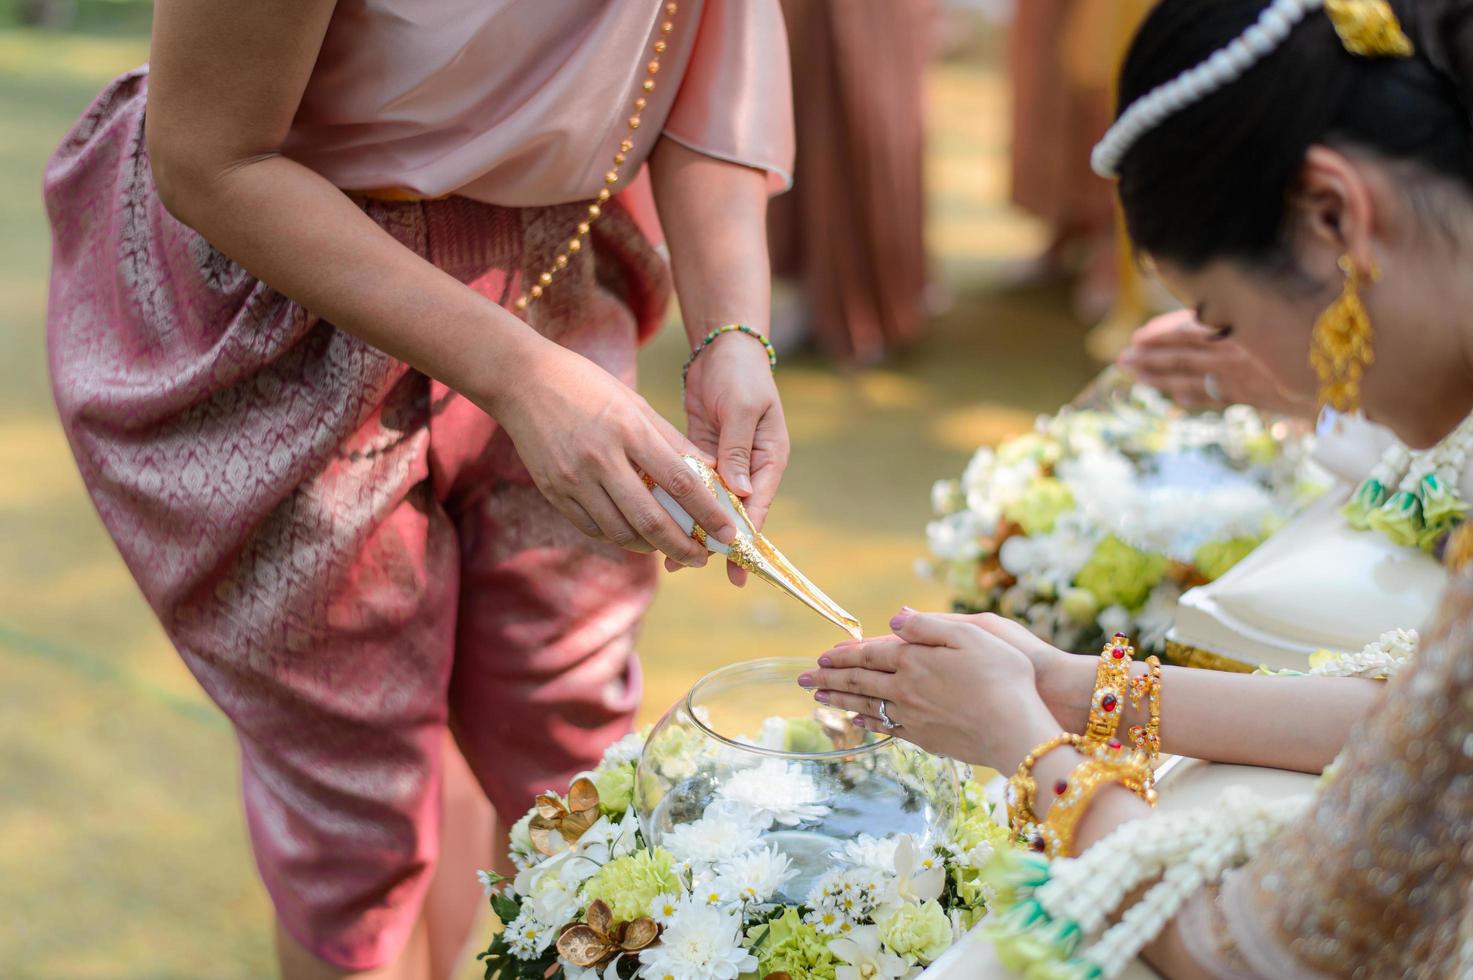 Holy water pouring ceremony over bride and groom hands, Thai traditional wedding engagement photo